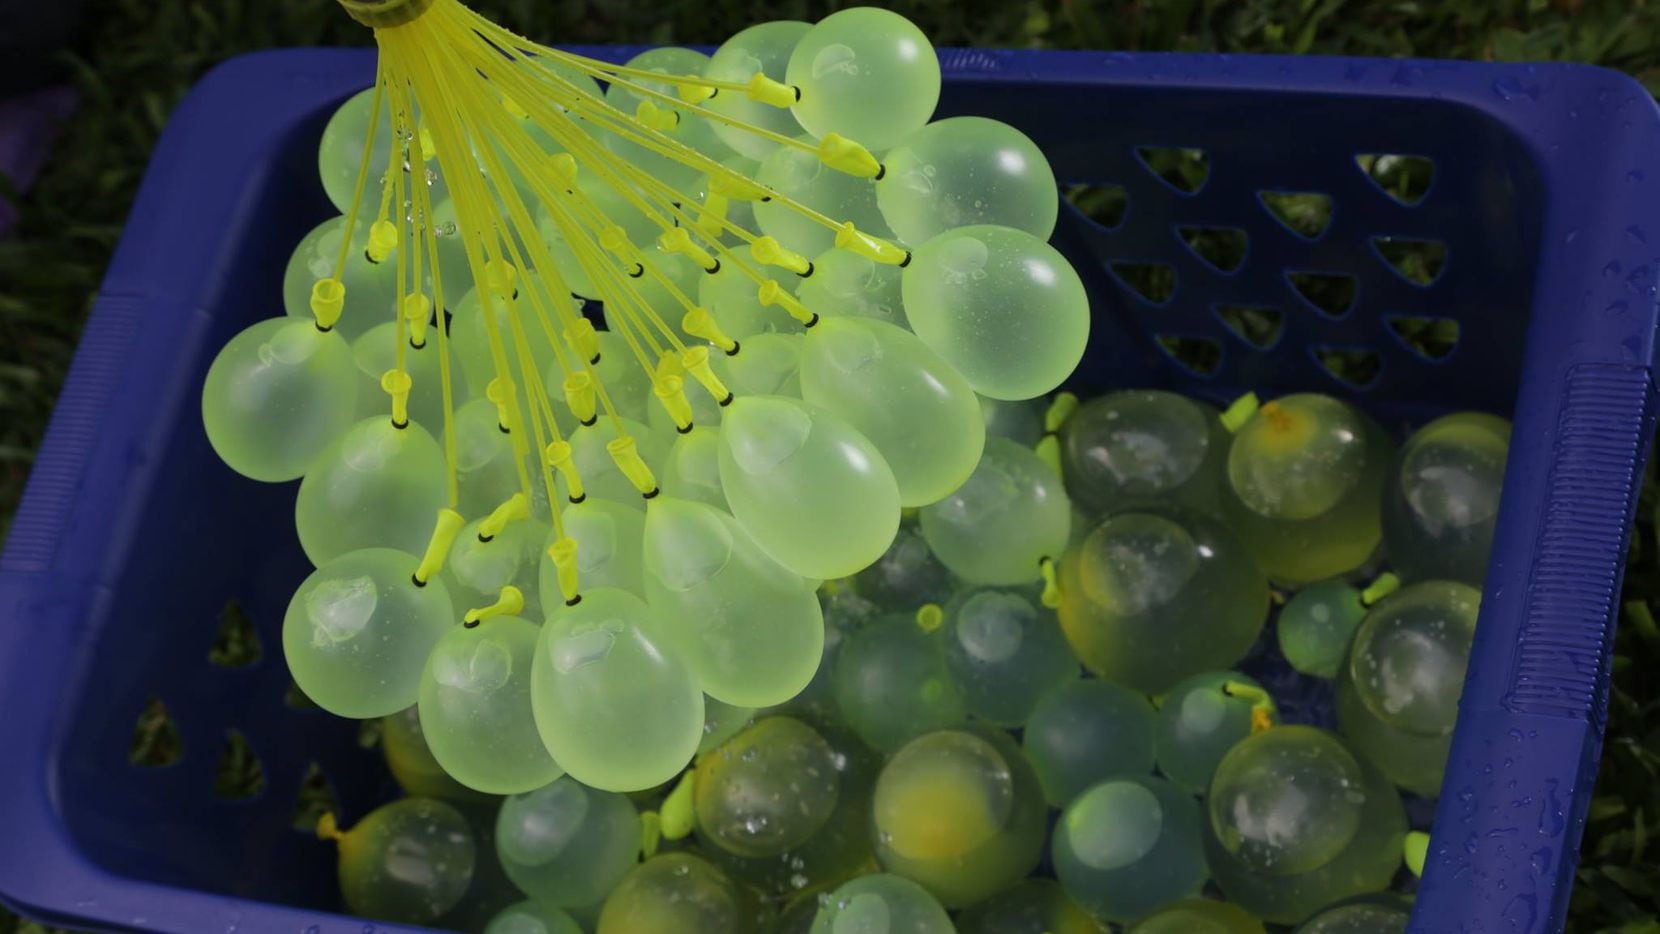 Bunch O Balloons can fill 100 water balloons in 60 seconds, perfect for summer activities...